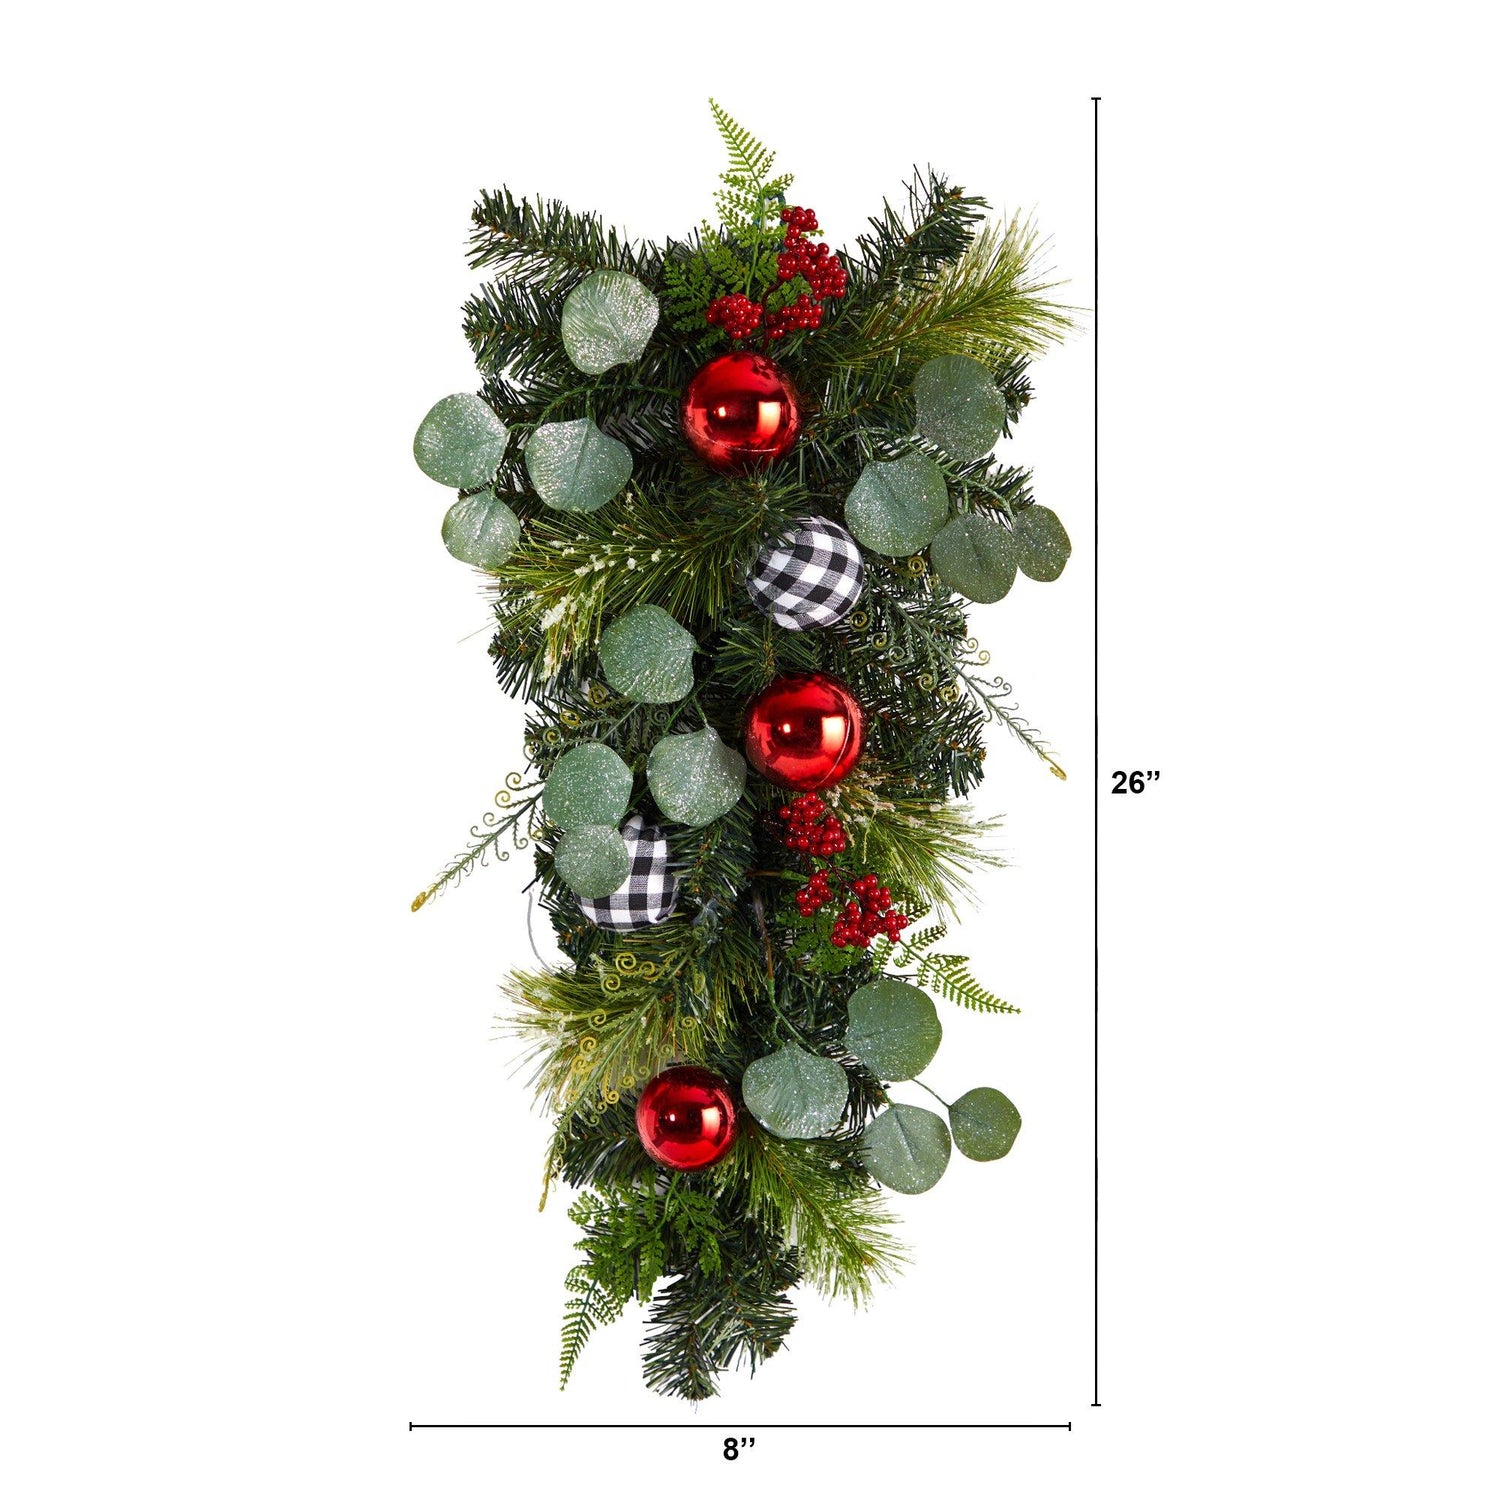 26” Holiday Christmas Greenery Ornament Artificial Swag